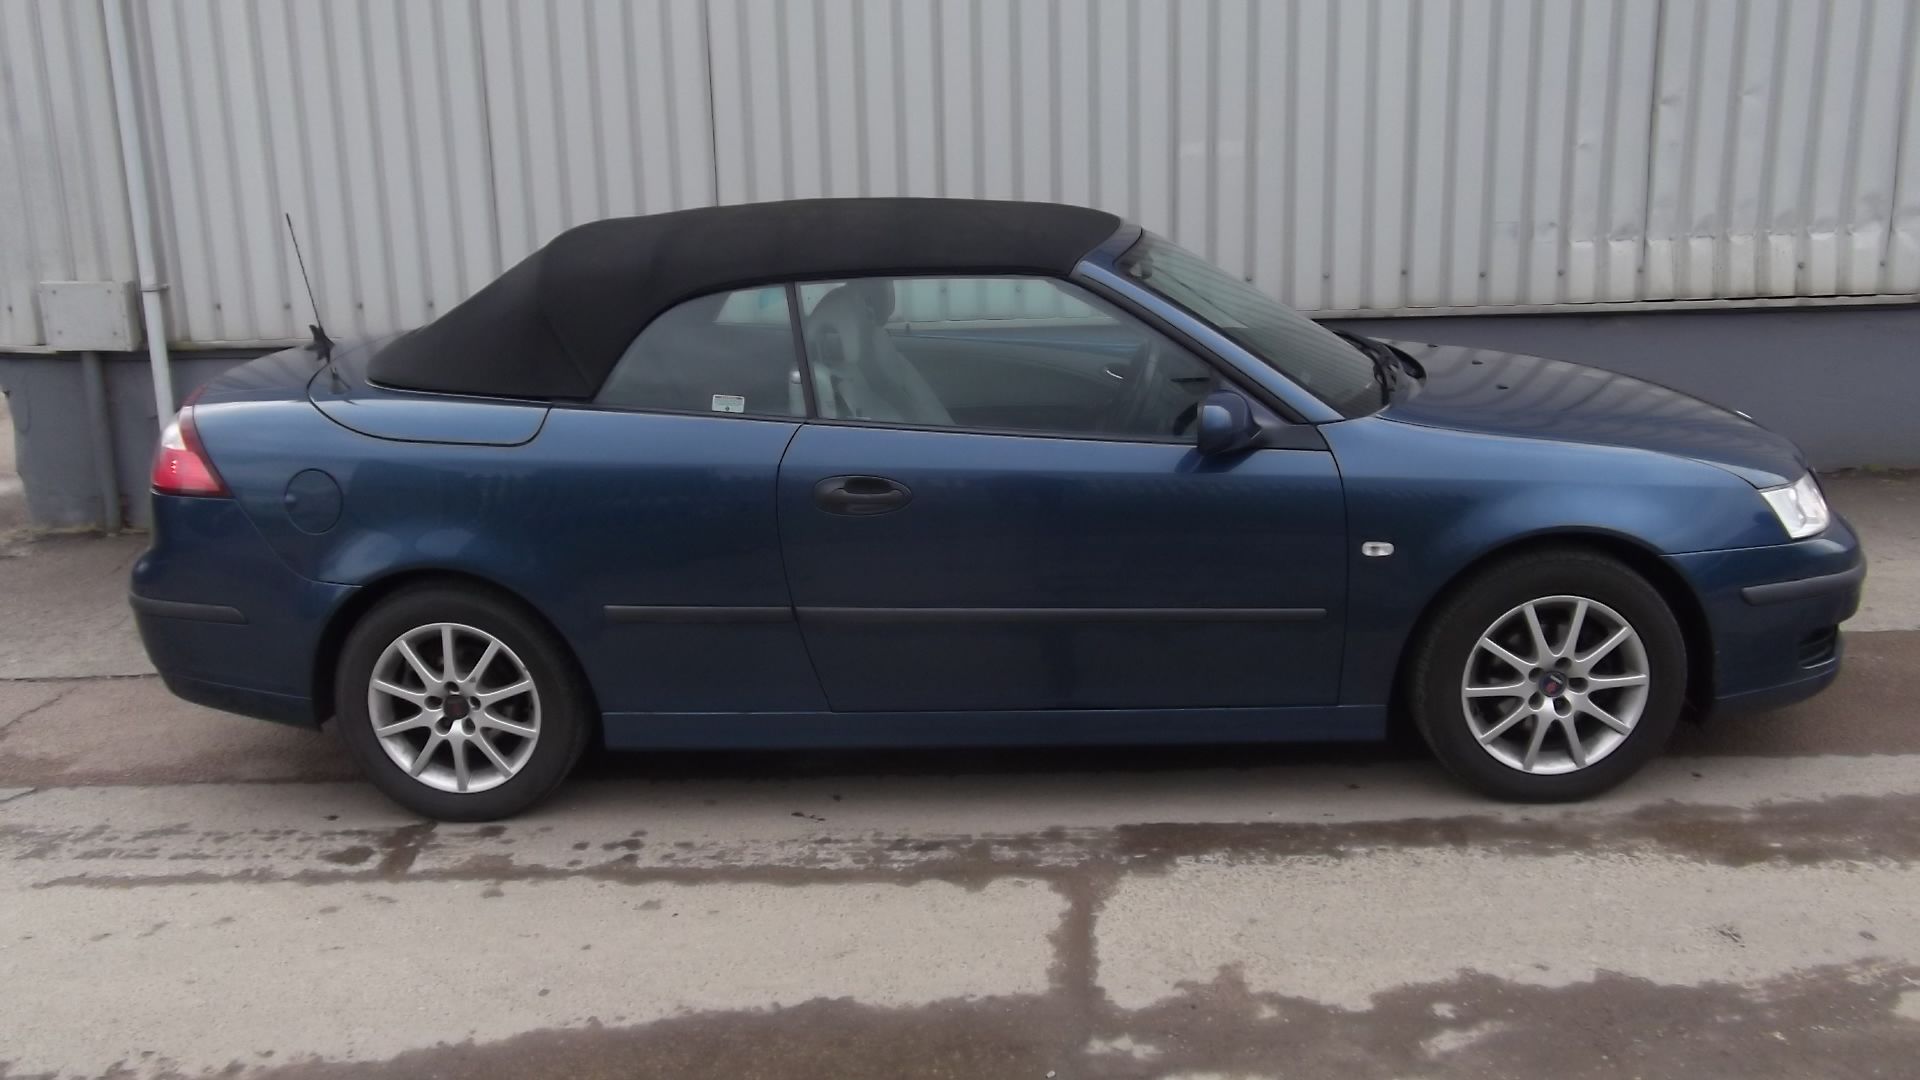 2006 Saab 9-3 Linear 150 Bhp 2.0 3Dr Convertible - FSH - CL505 - NO VAT ON THE HAMM - Image 5 of 19